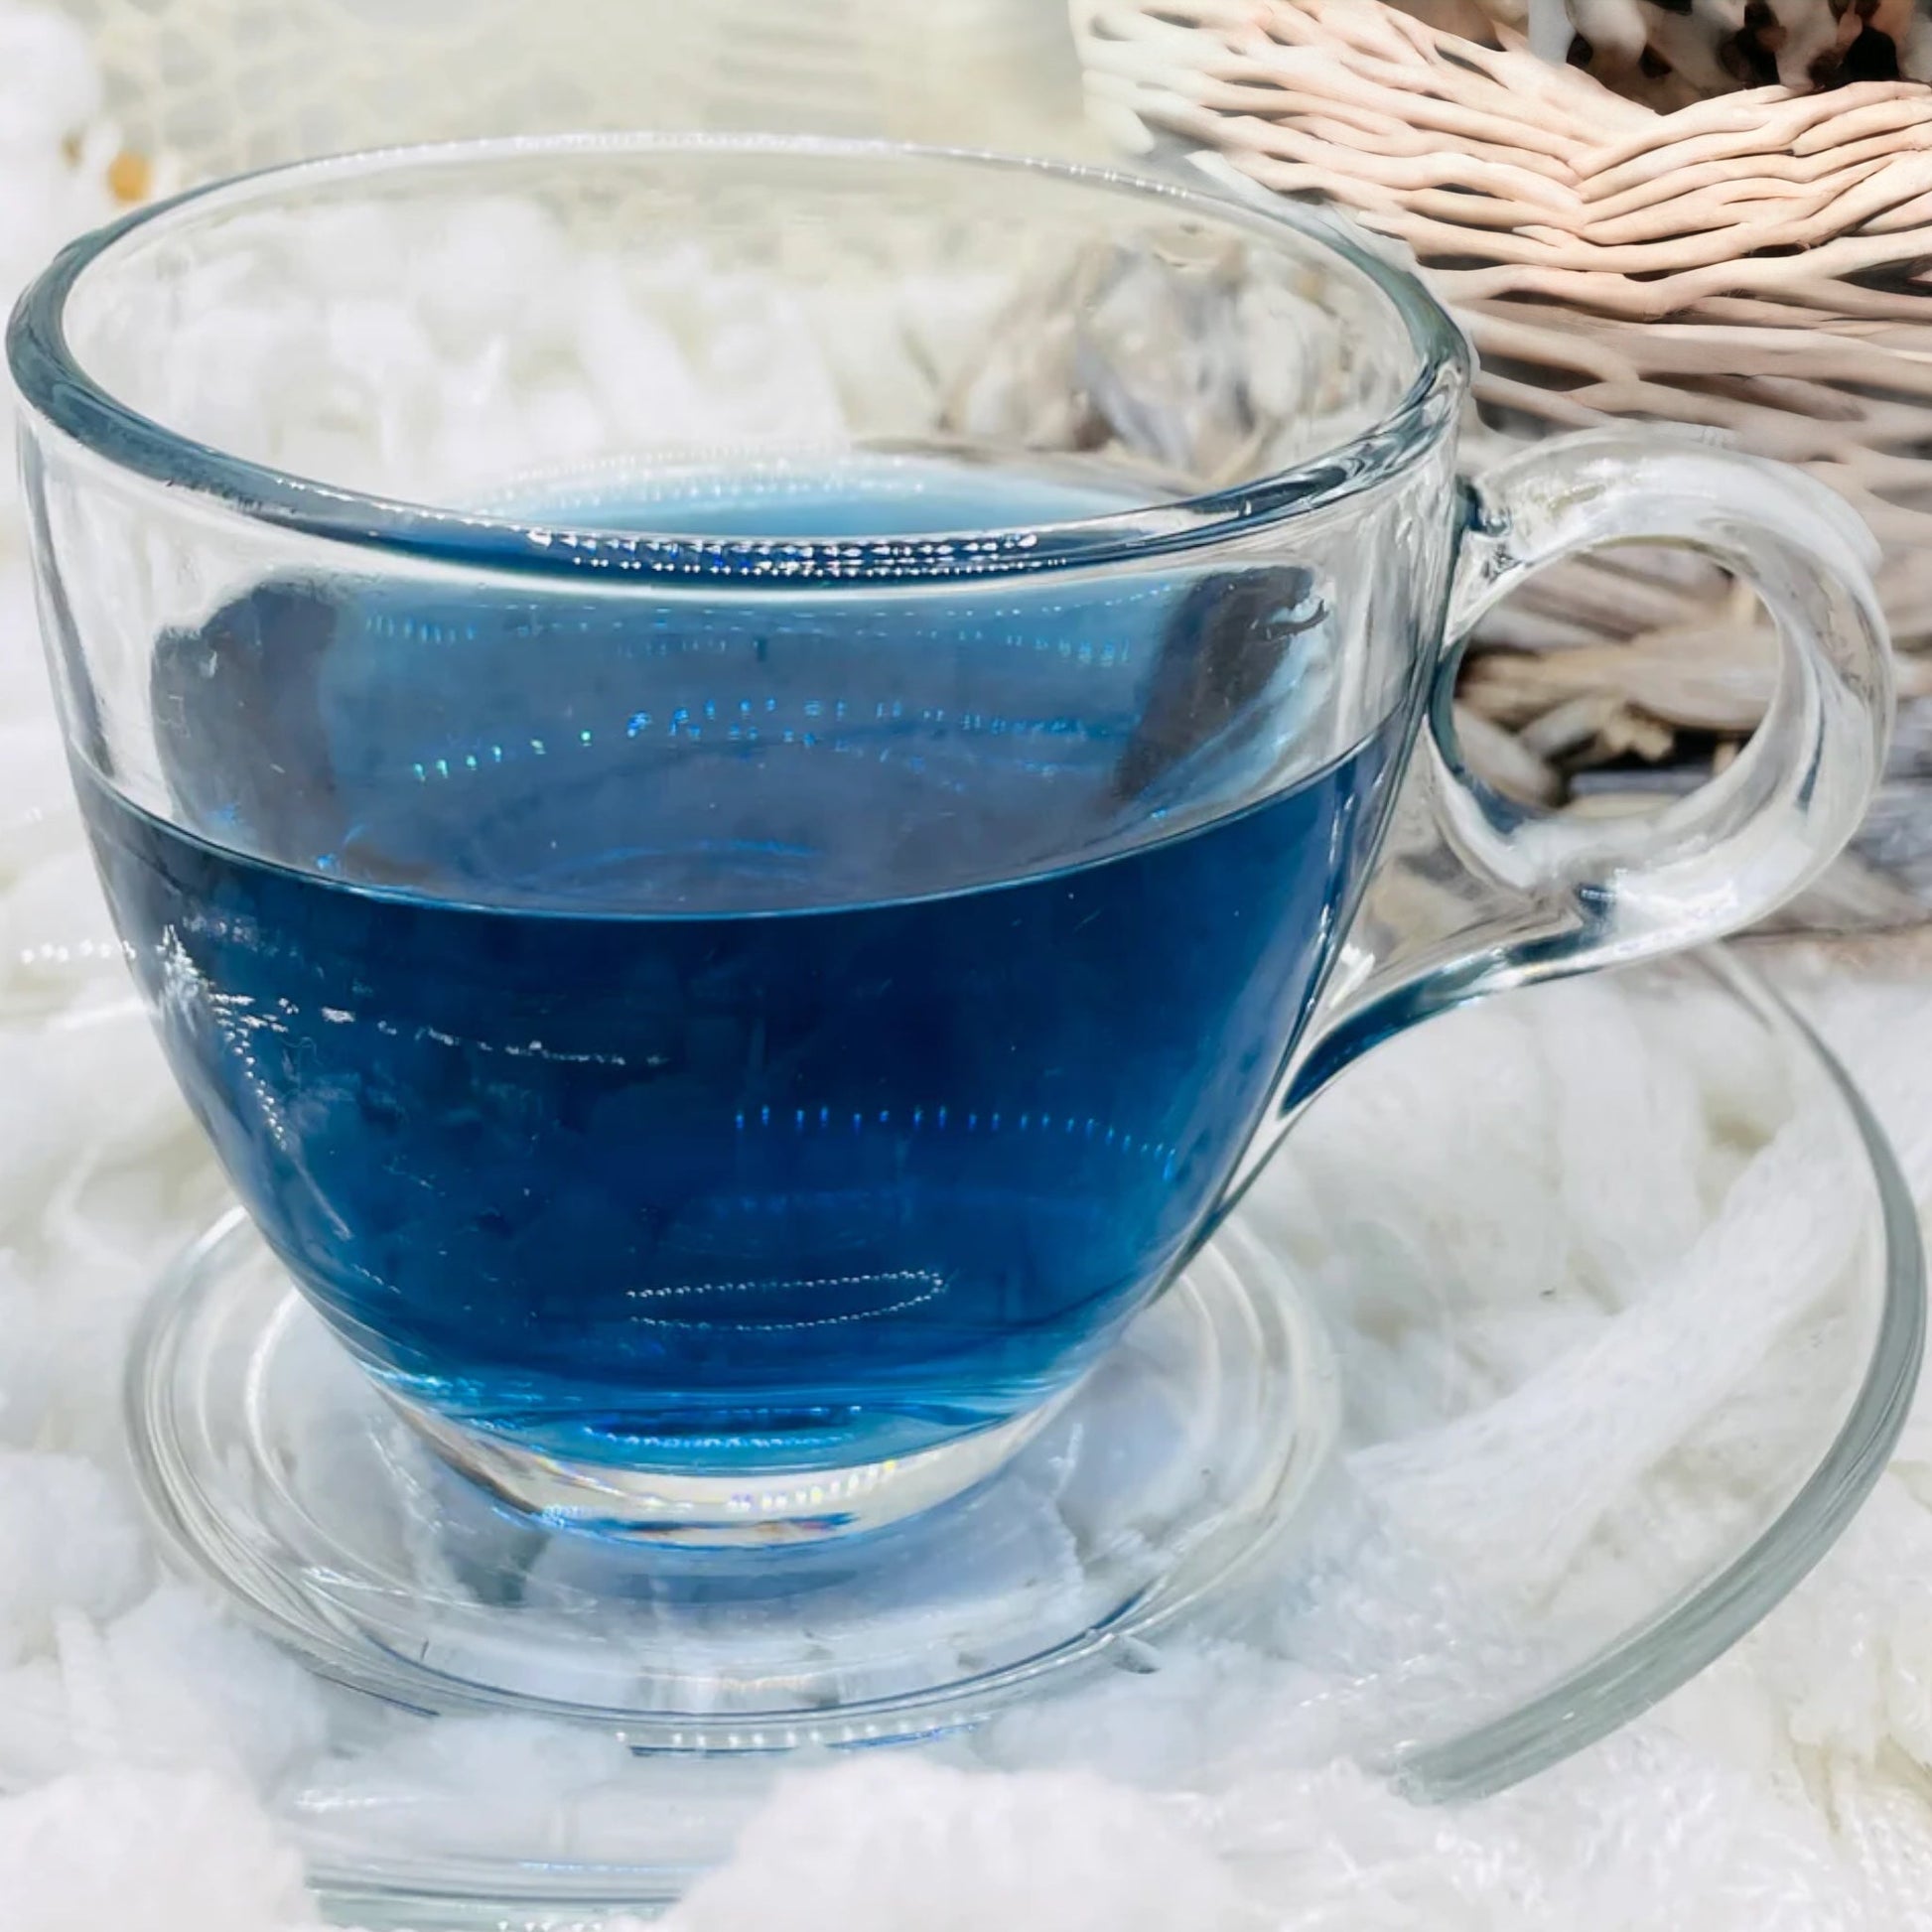 The picture is a clear glass cup of Blue Magic butterfly pea flower tea in a vivid blue colour. 